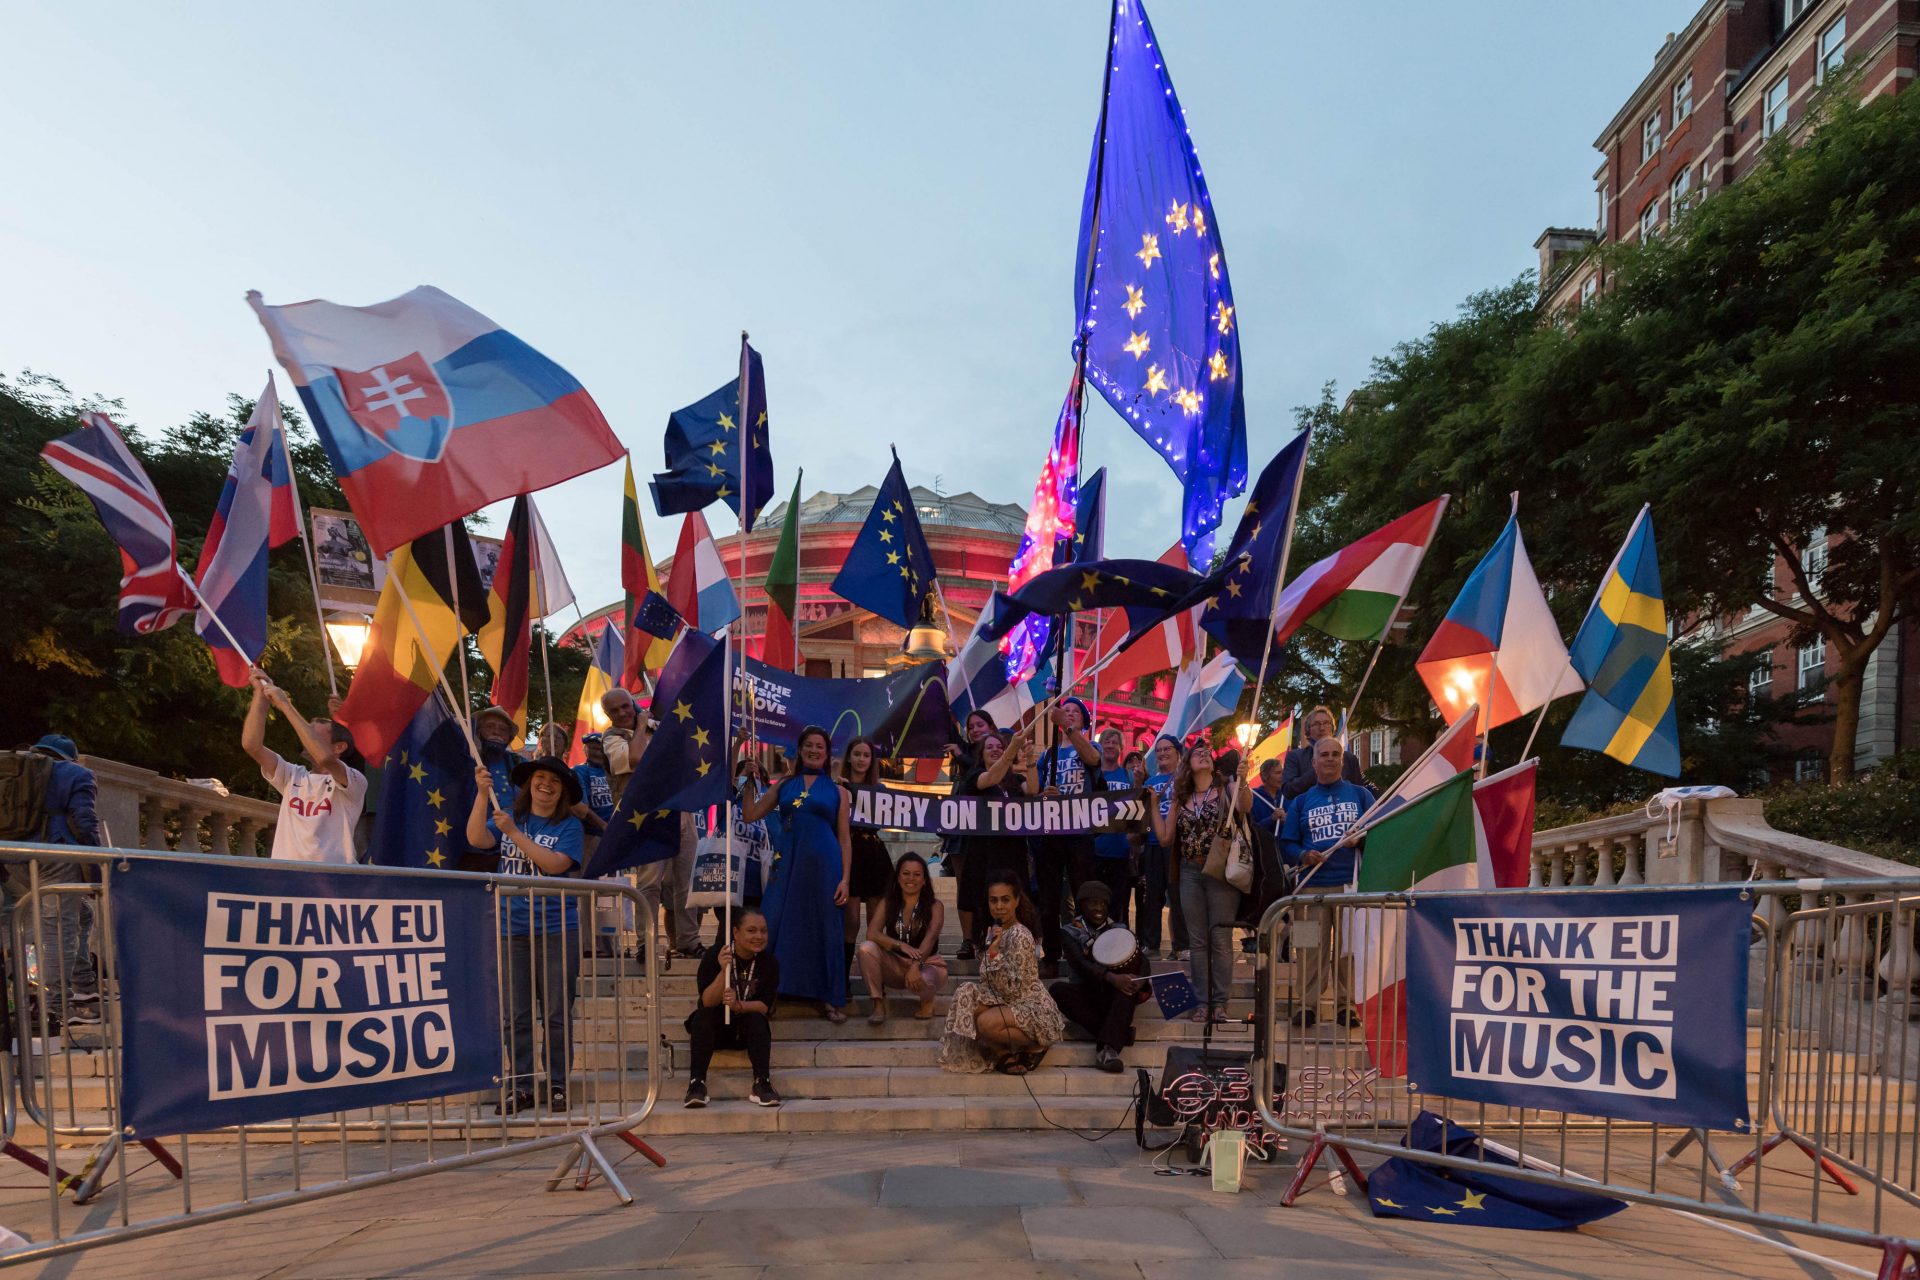 Pro-EU activists, musicians and touring artists outside the Royal Albert Hall ahead of the Last Night of the Proms earlier this year. Photo: Wiktor Szymanowicz/Barcroft
Media/Getty Images.